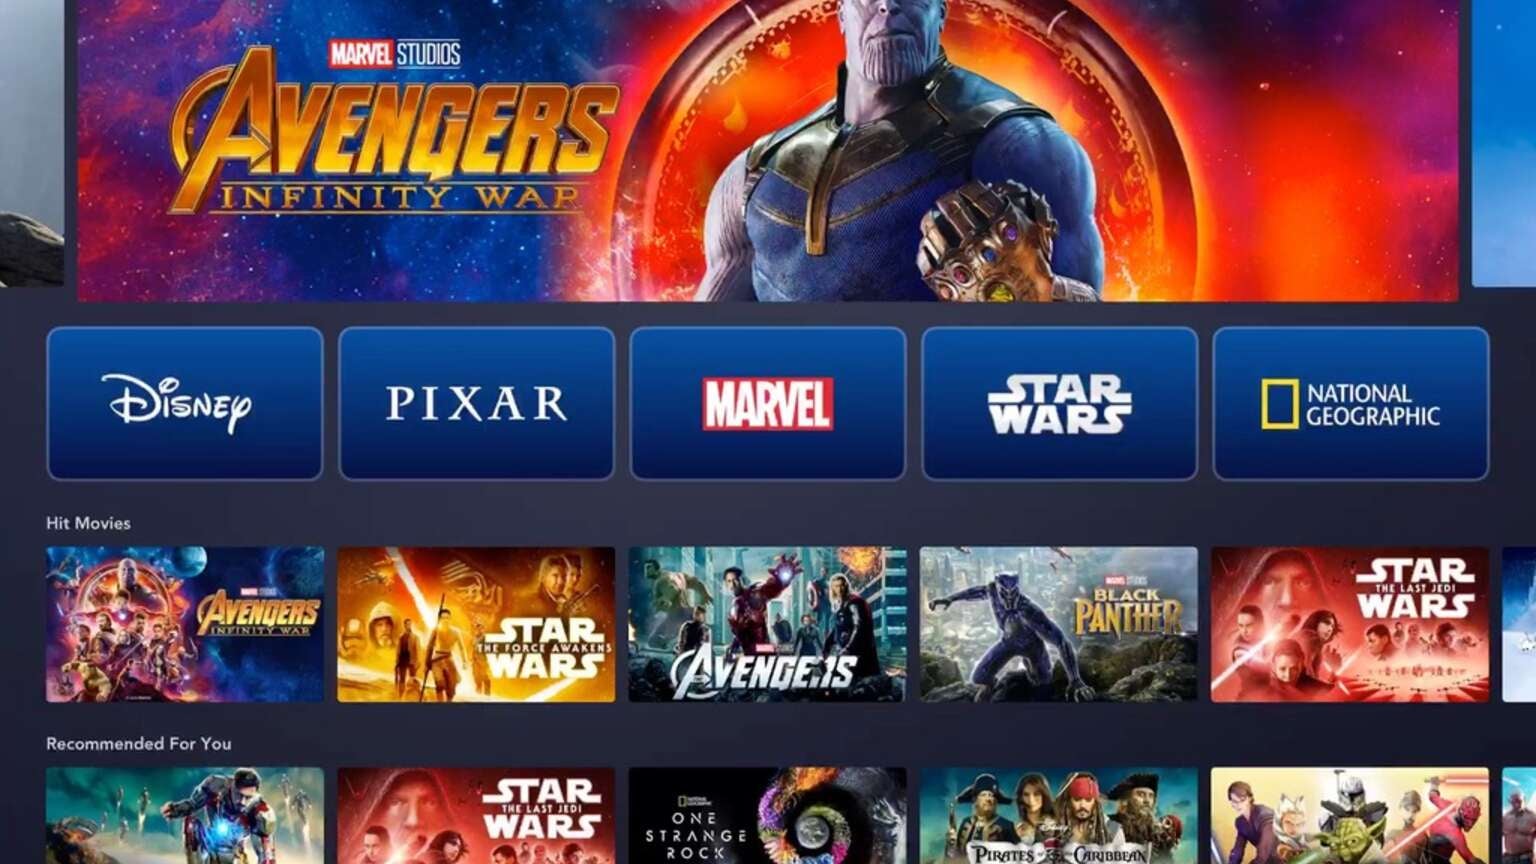 Can You Get Disney Plus For Free With Verizon